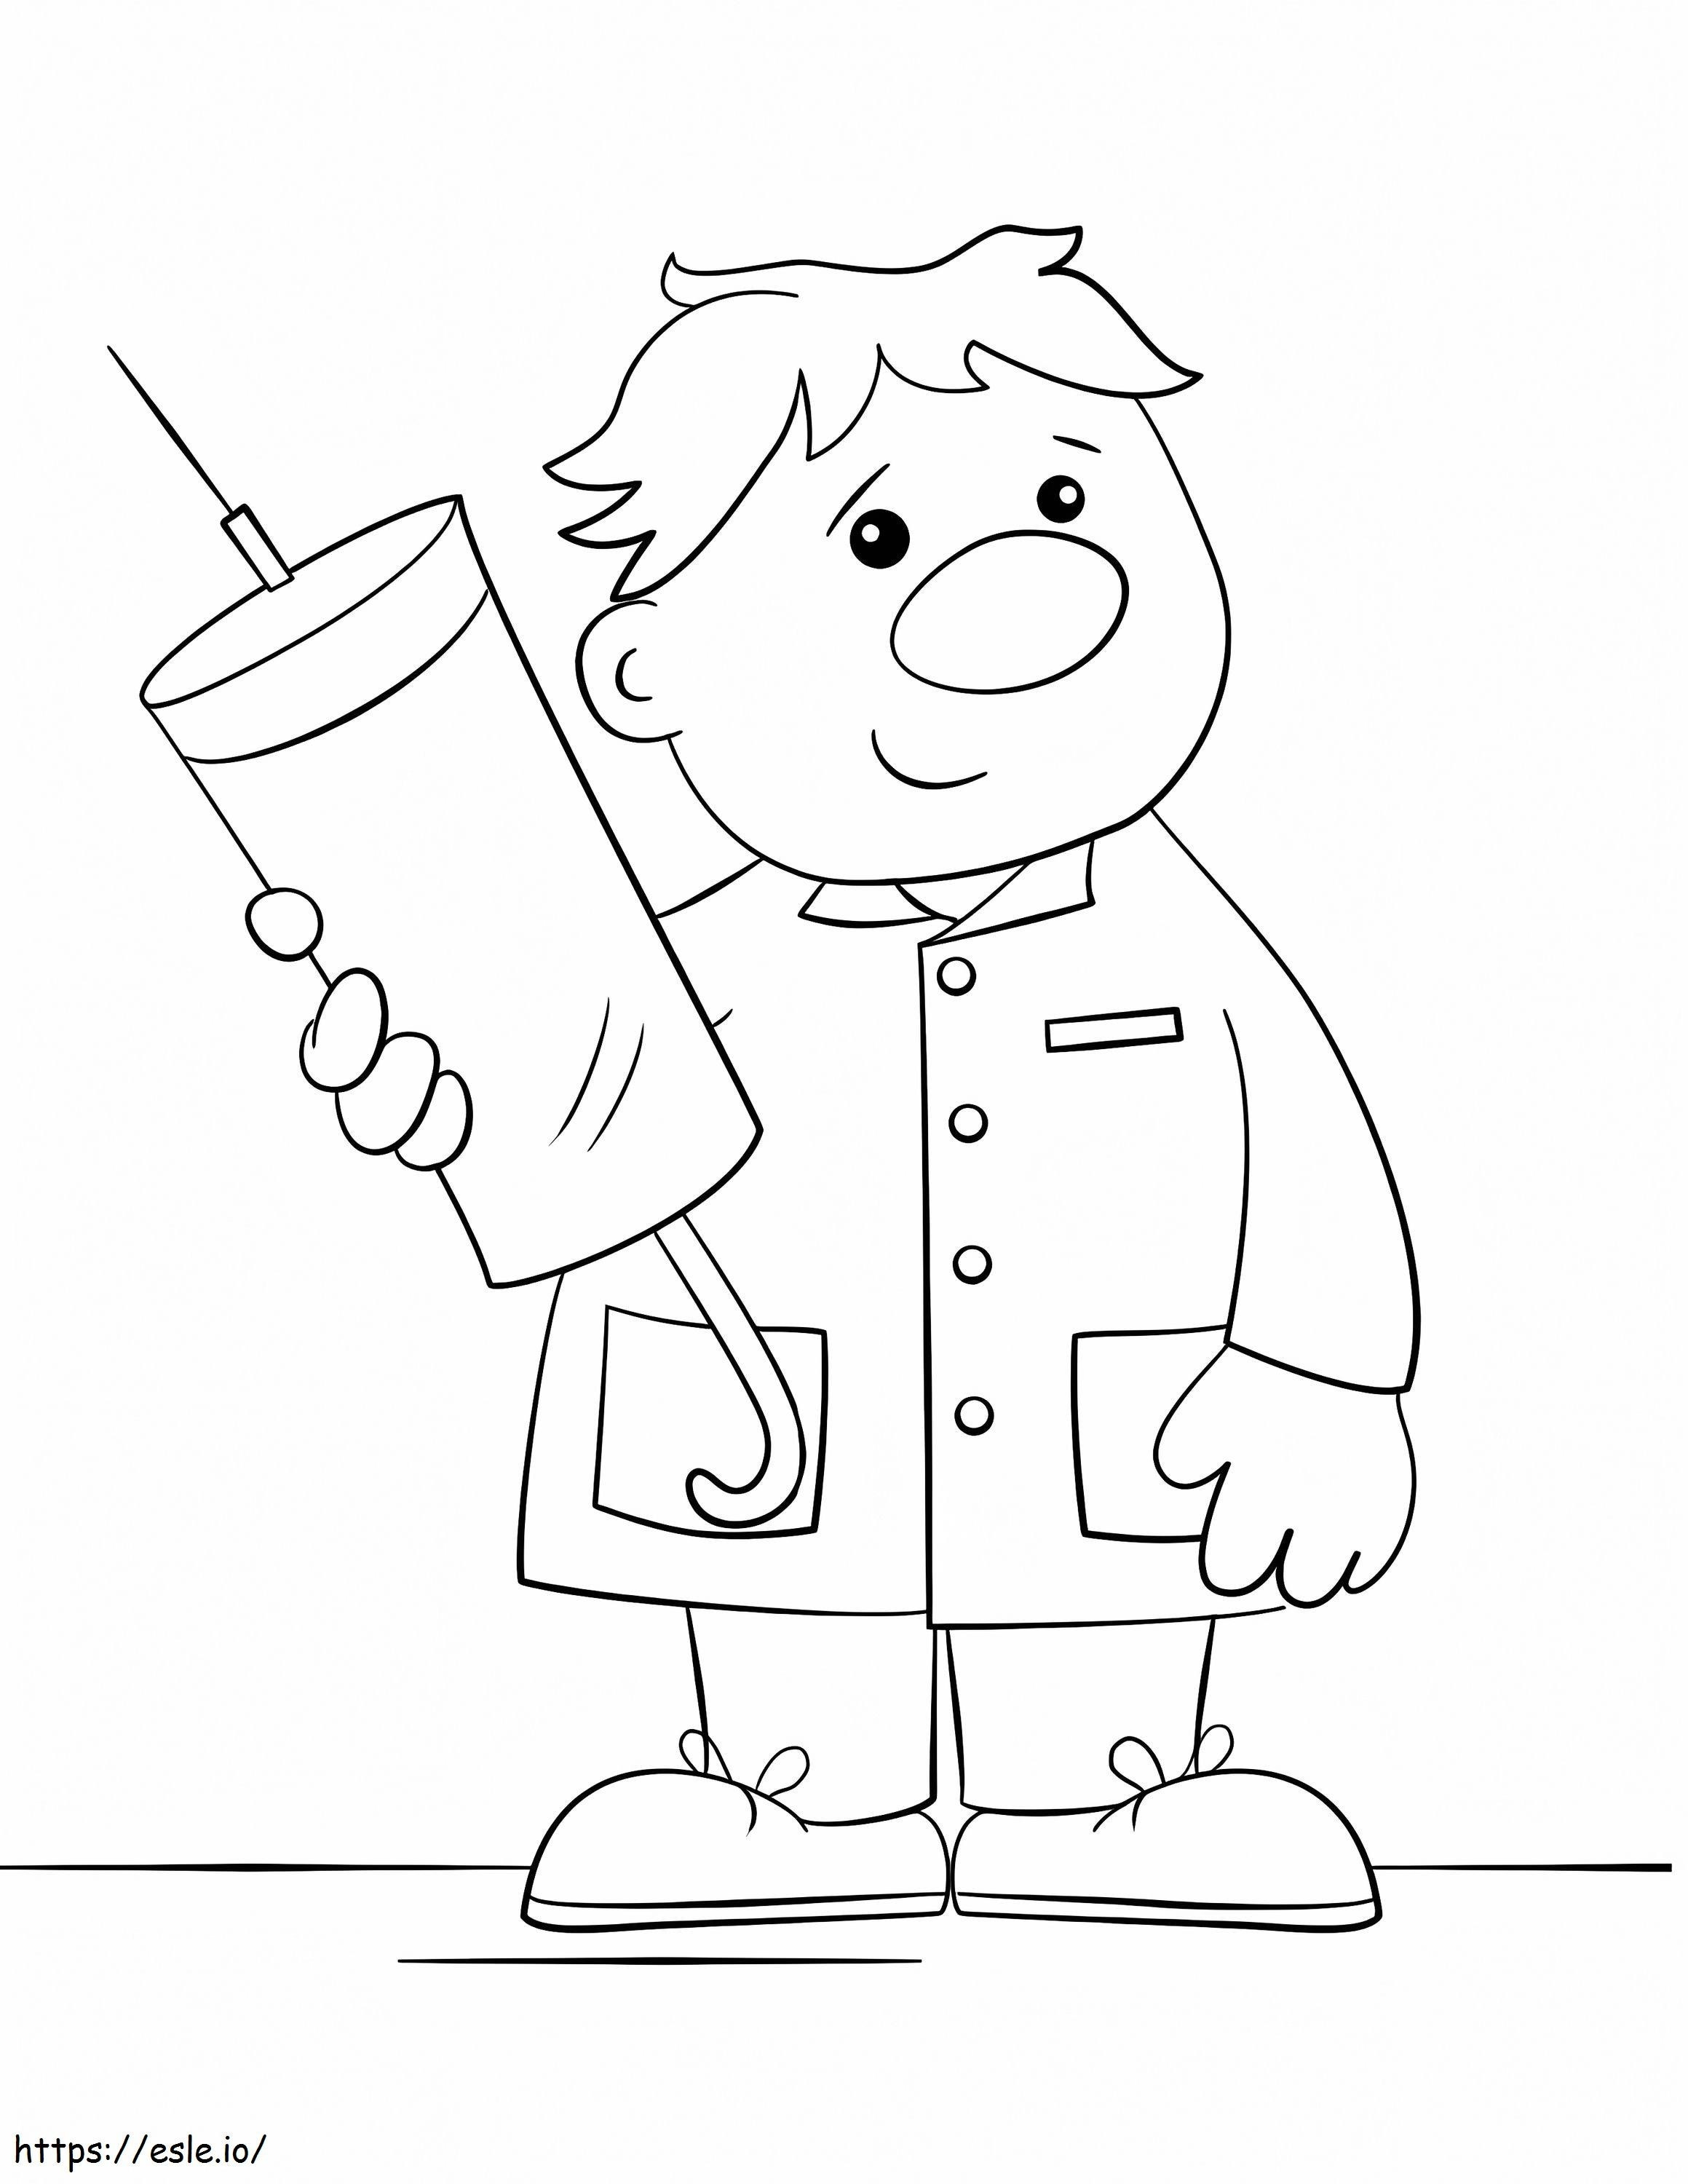 Doctor With A Syringe coloring page